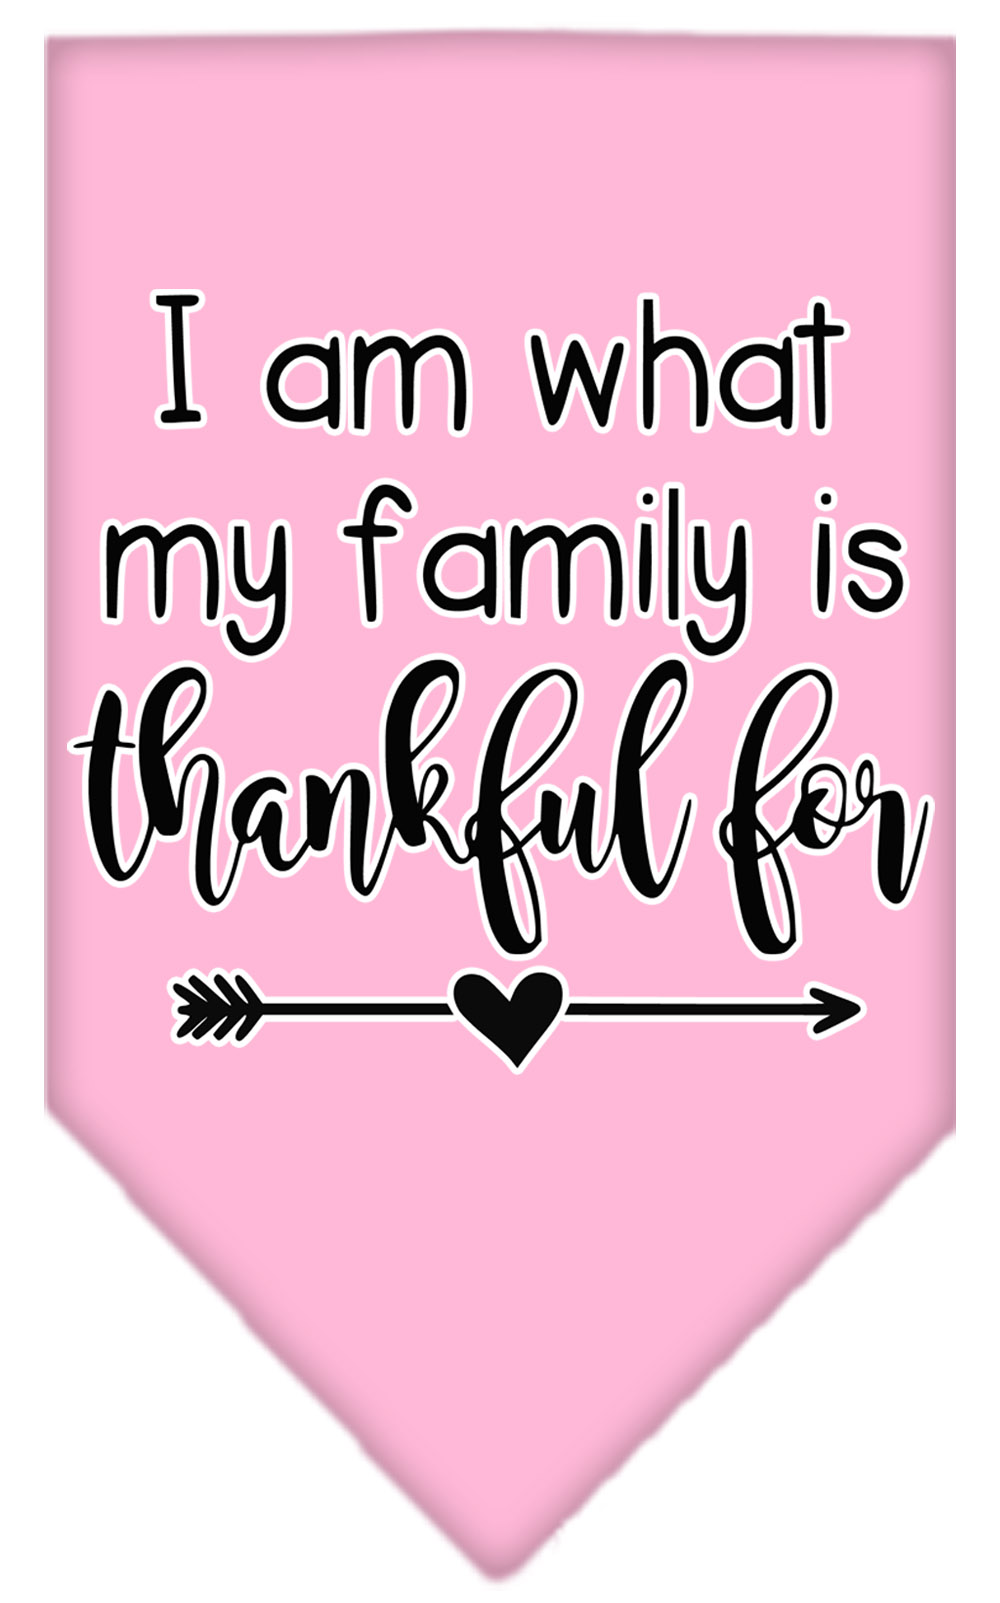 I Am What My Family is Thankful For Screen Print Bandana Light Pink Large